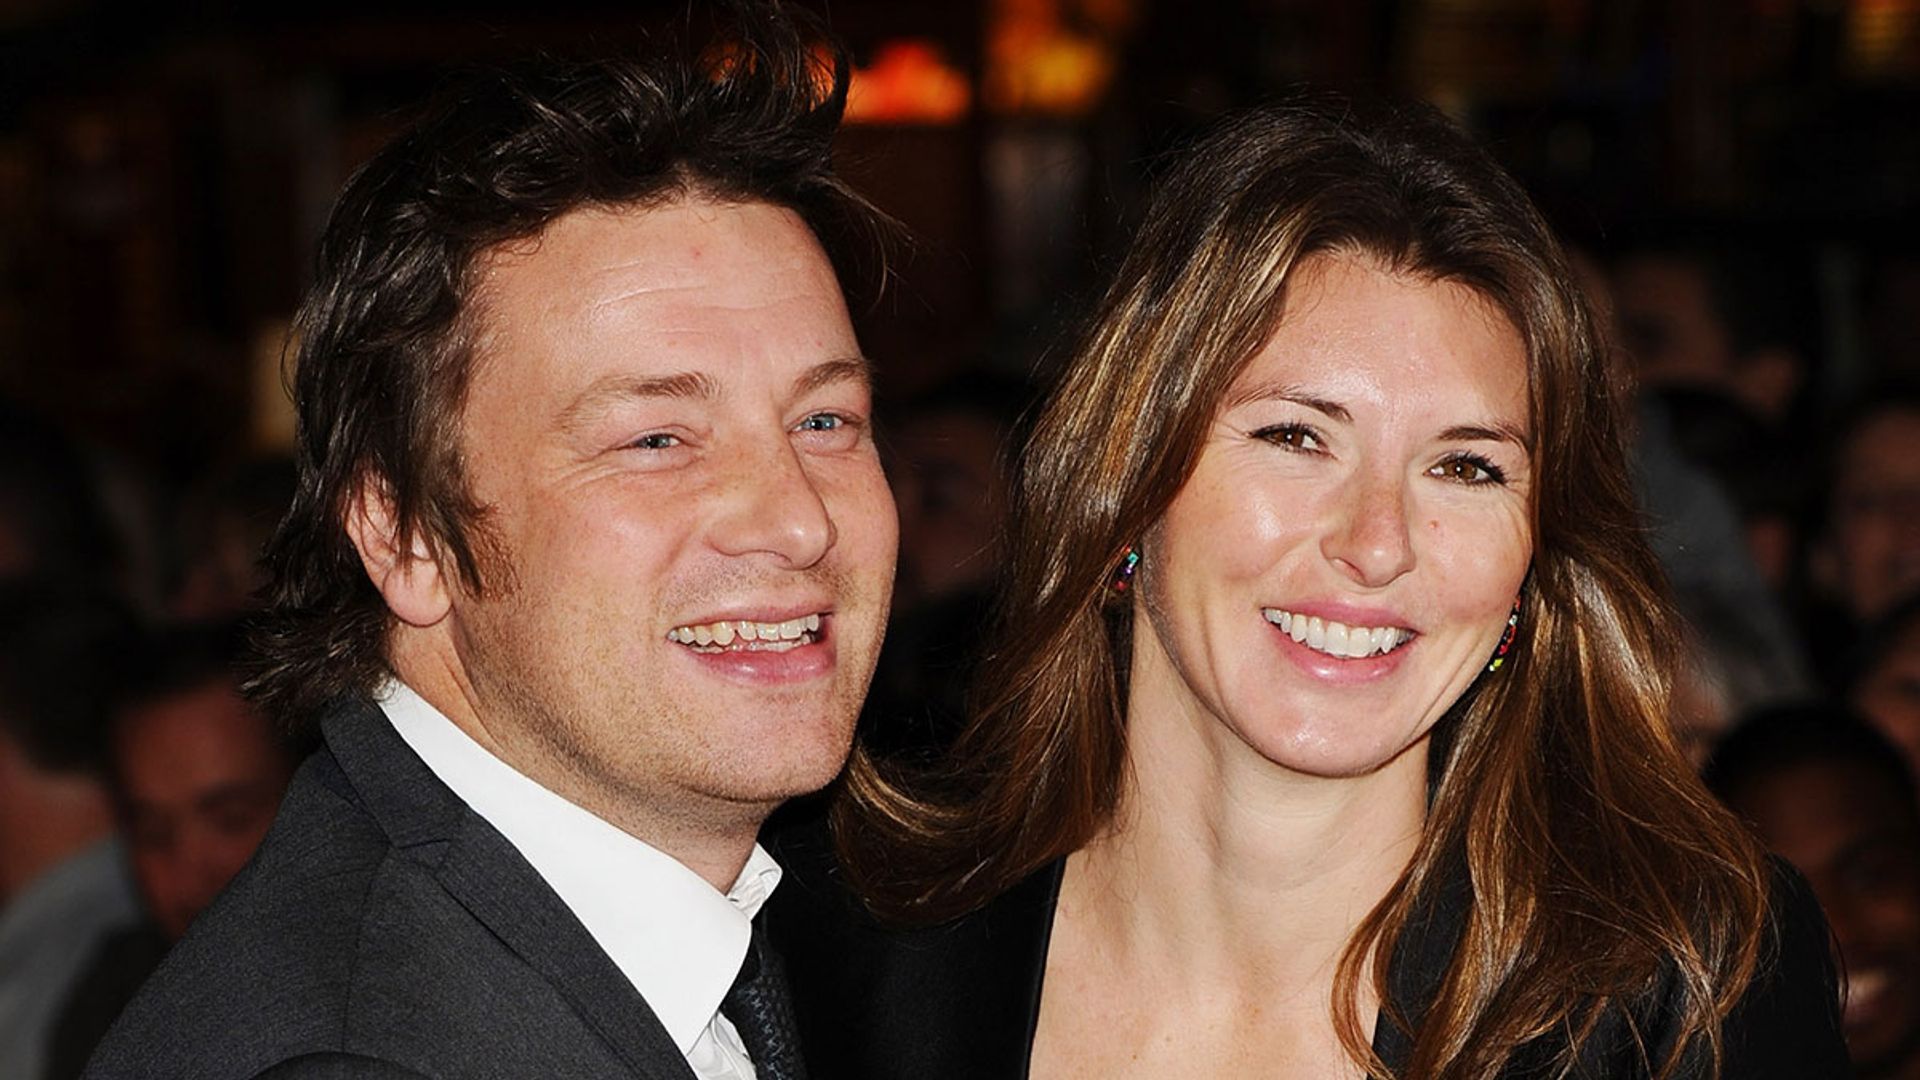 Jamie and Jools Oliver are ageless in unearthed romantic photo – SEE